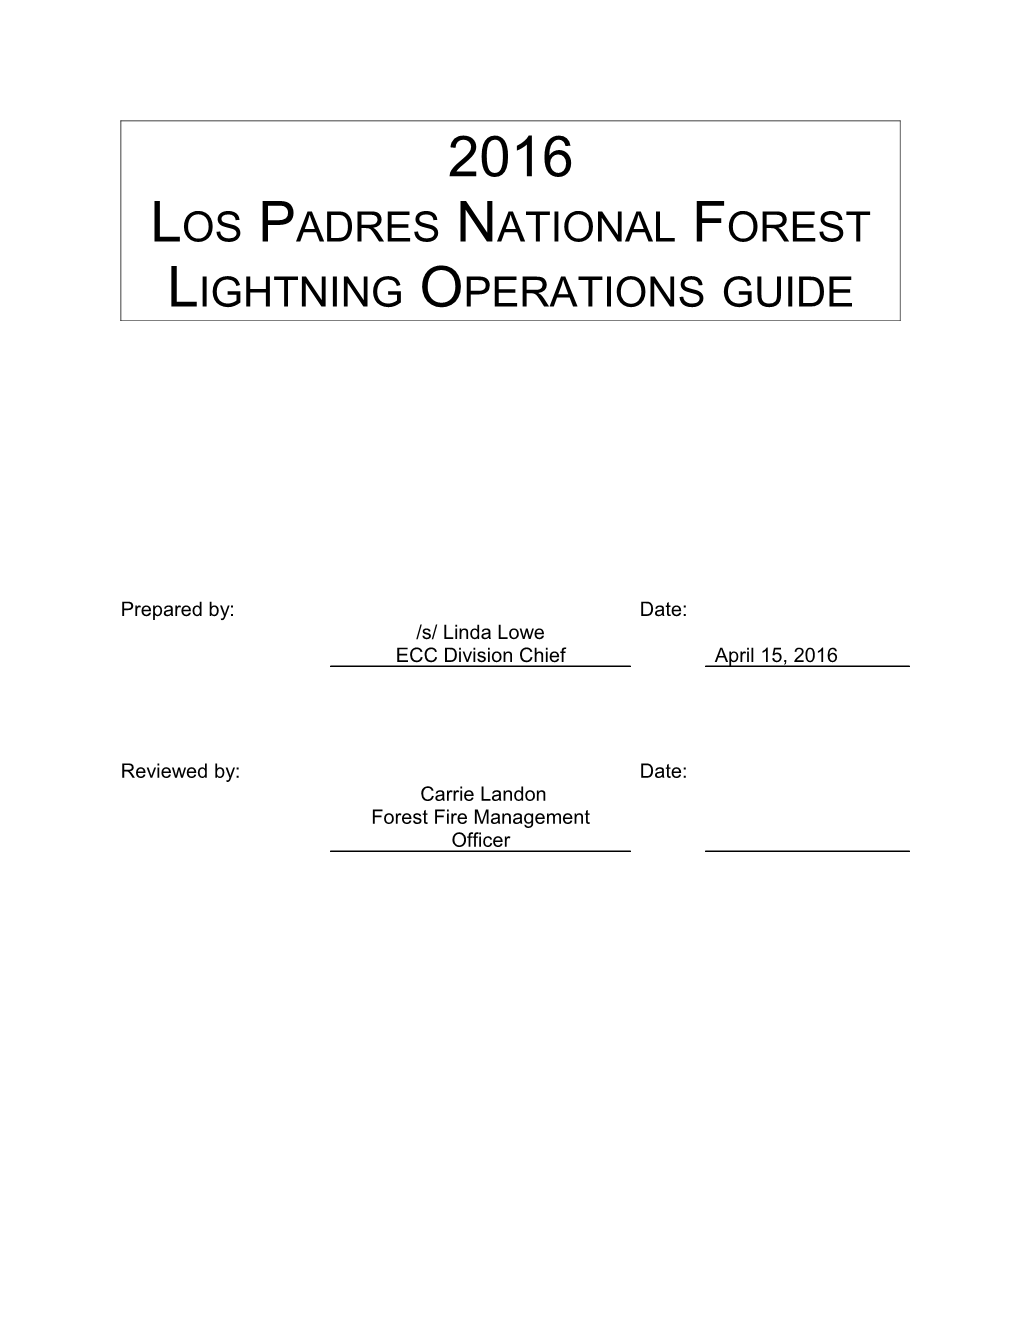 Los Padres National Forest Lightning Operations Plan